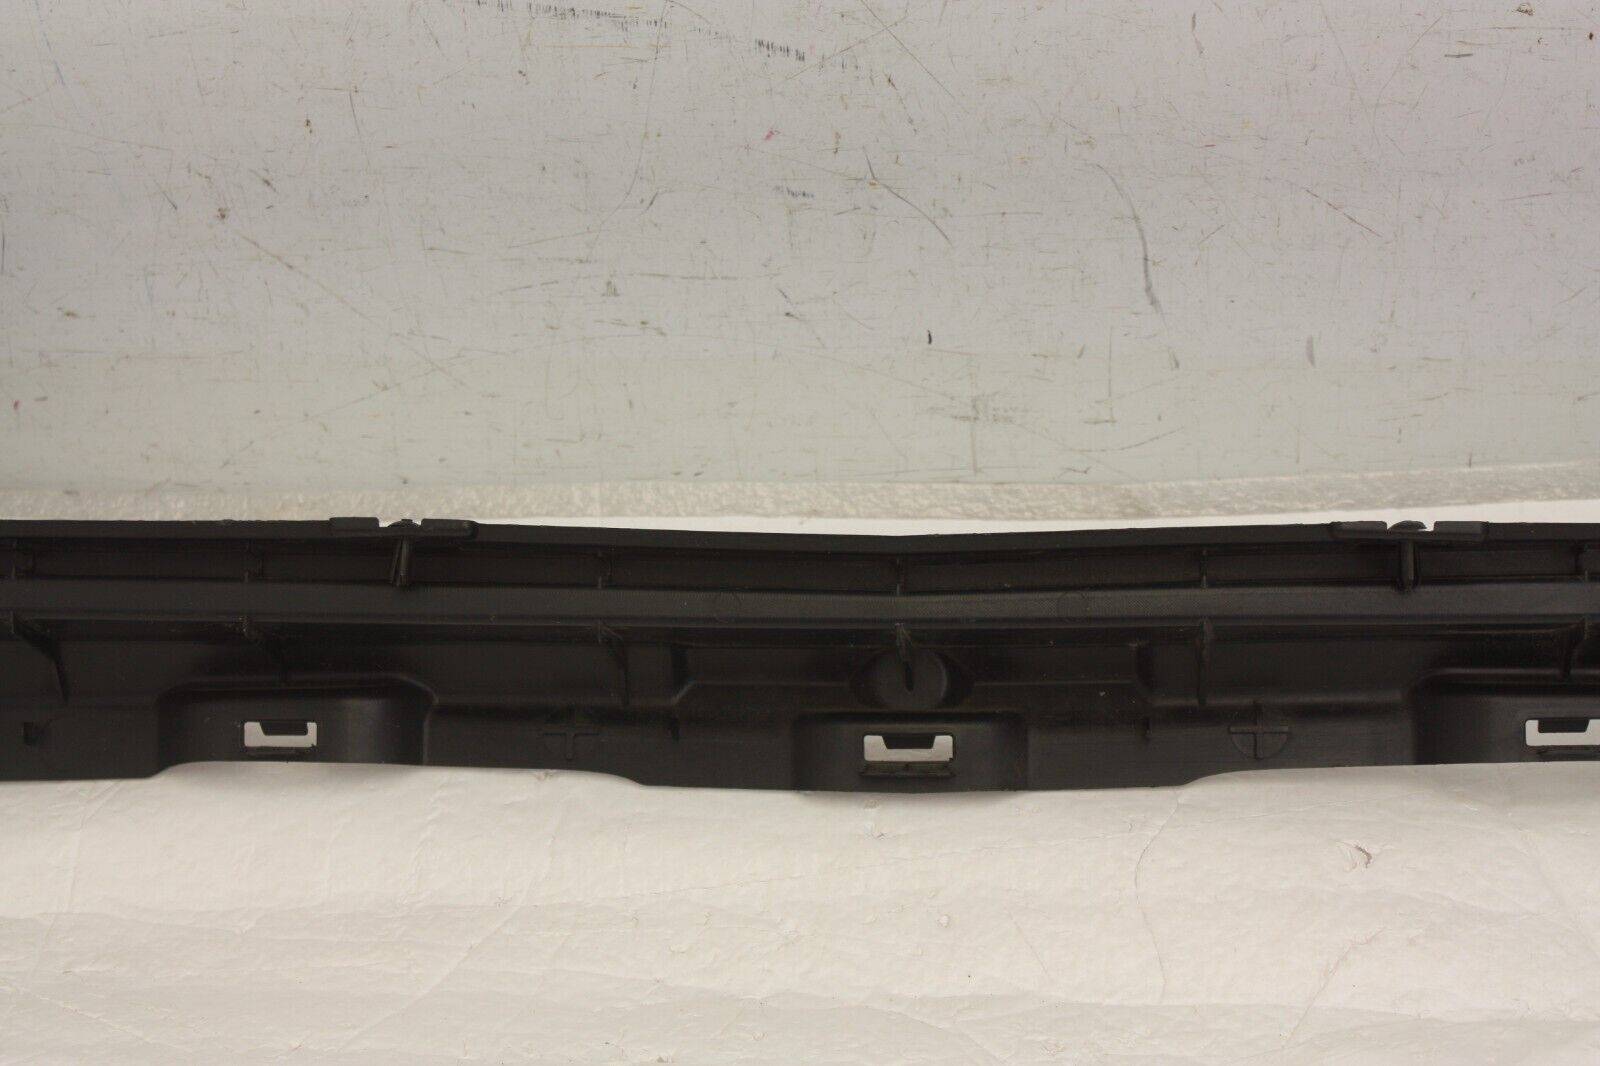 Mercedes-GLA-X156-Front-Bumper-Cover-Shroud-2014-TO-2017-A1568854422-Genuine-176277594797-4